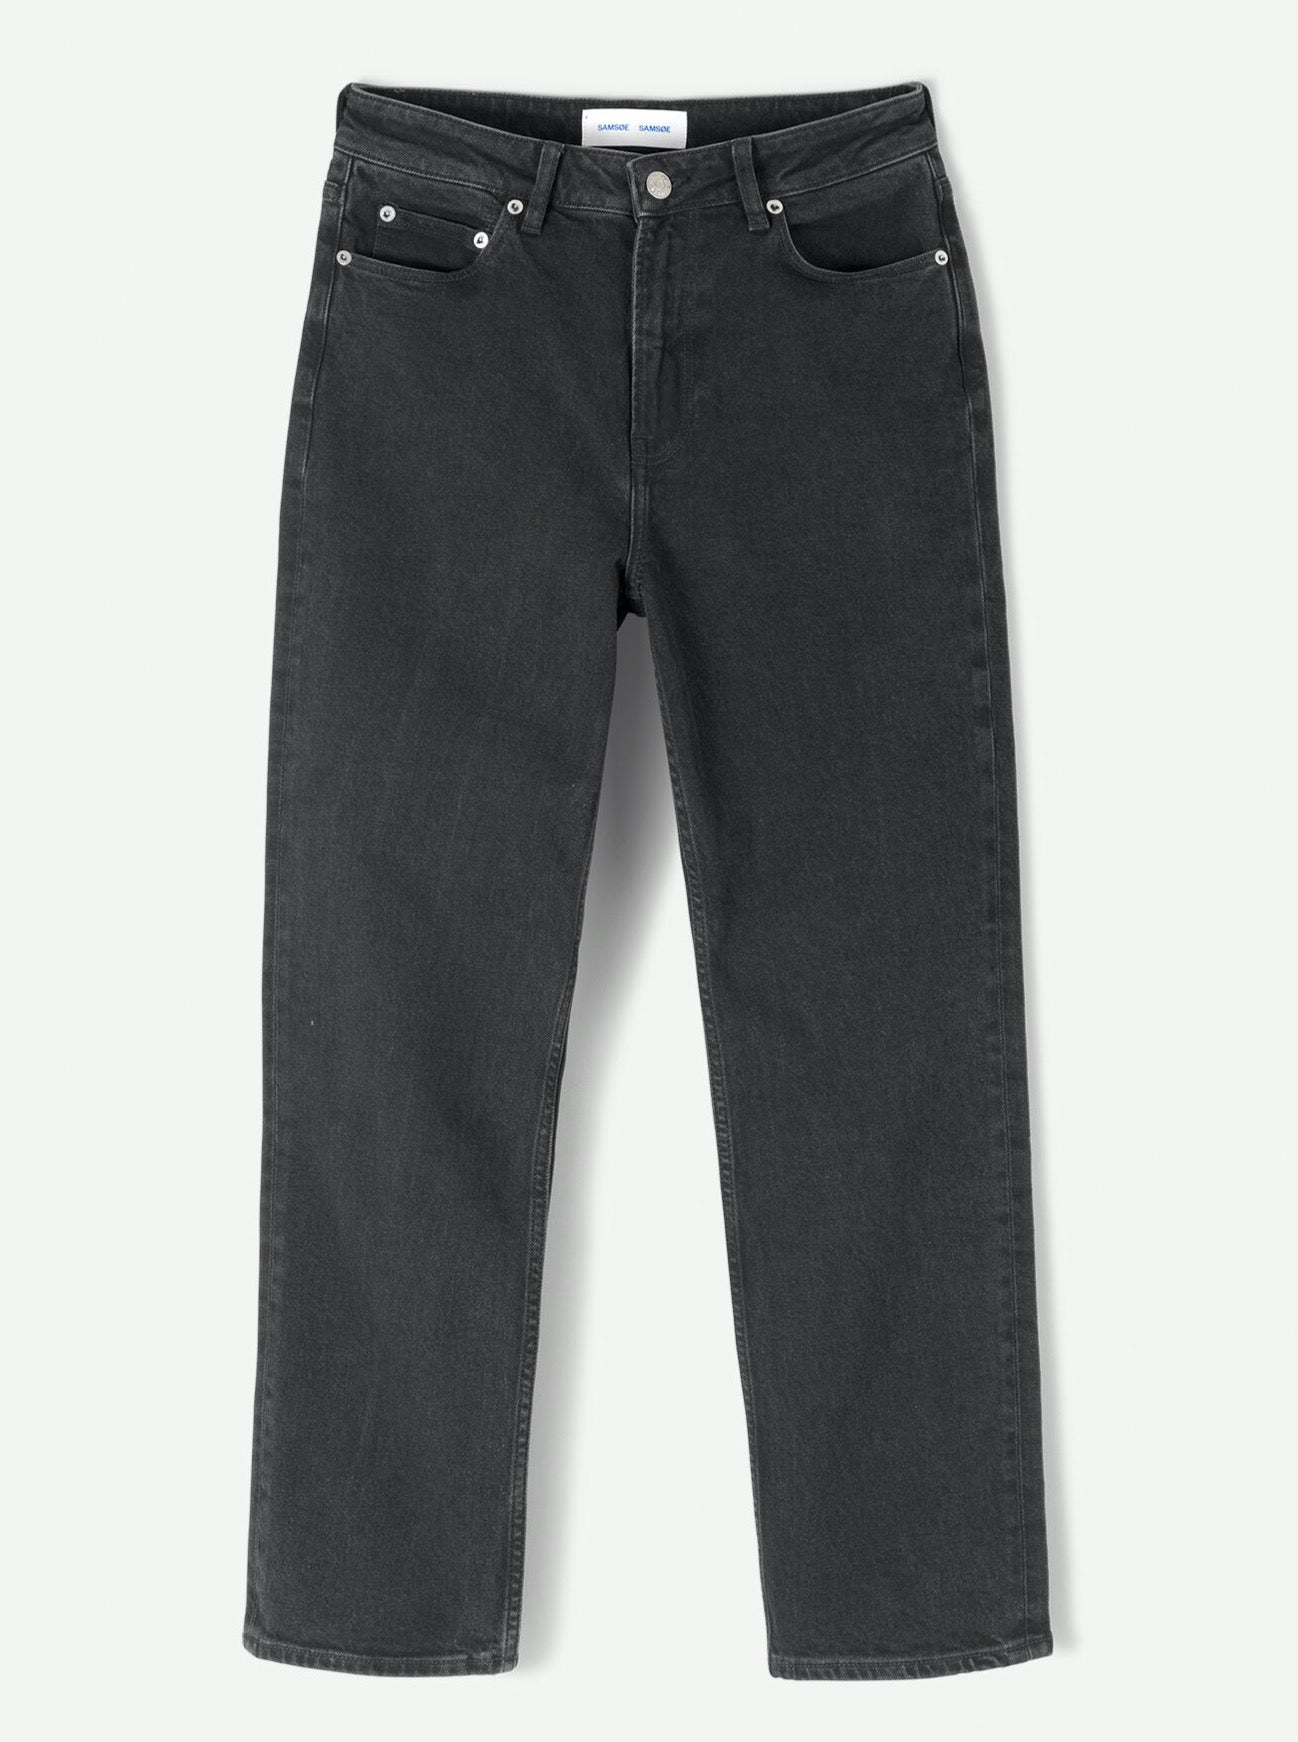 SAMSOE SAMSOE MARIANNERegular-fit jeans with high waist, straight leg shape and a cropped length. Made in organic cotton black denim with comfort-stretch which creates a better fit.  Organic cotton